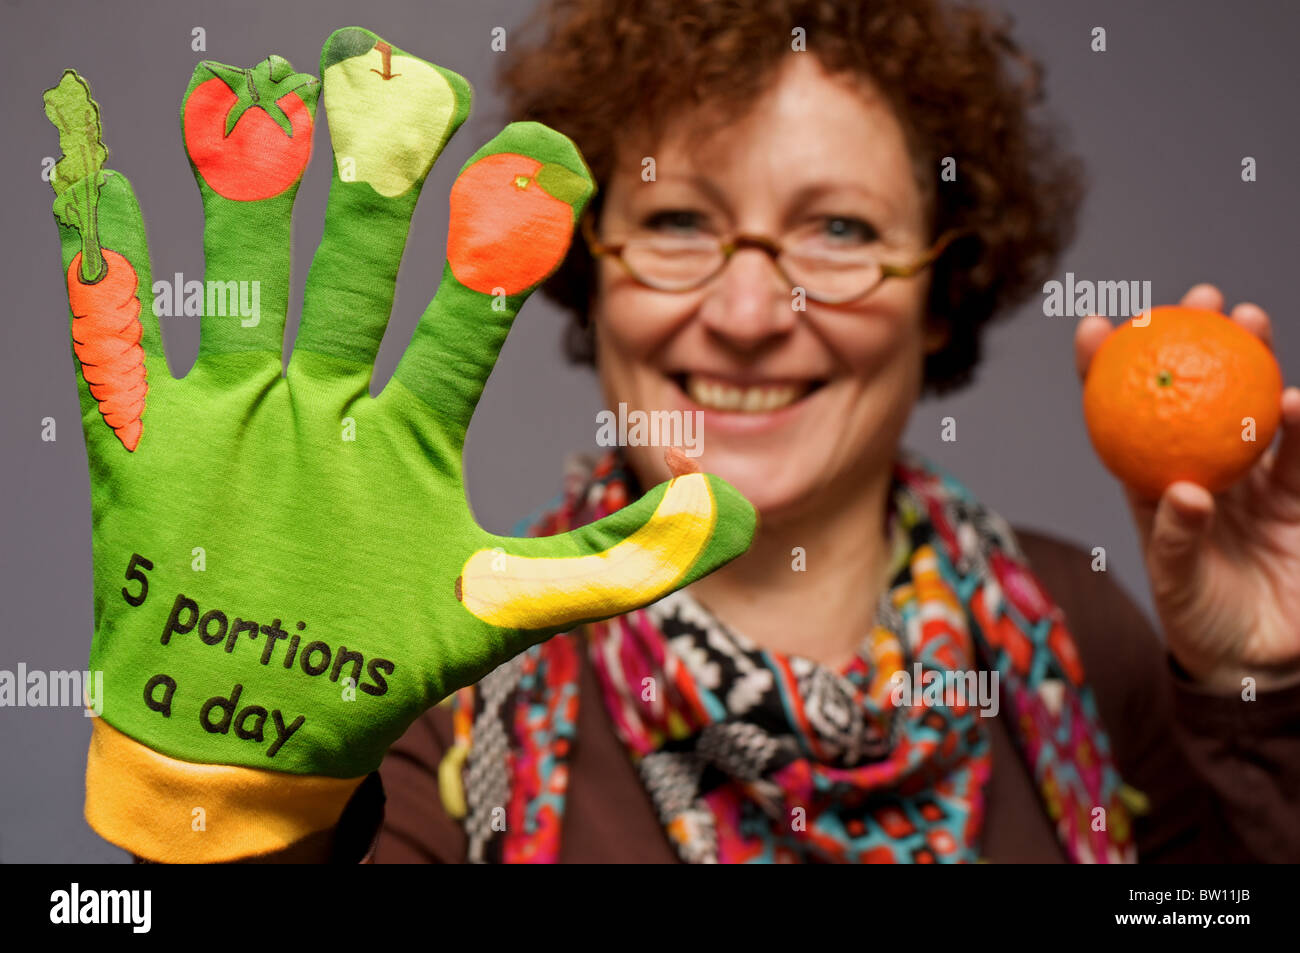 Classroom assistant teaching the five portions of fruit and vegetables a-day Stock Photo